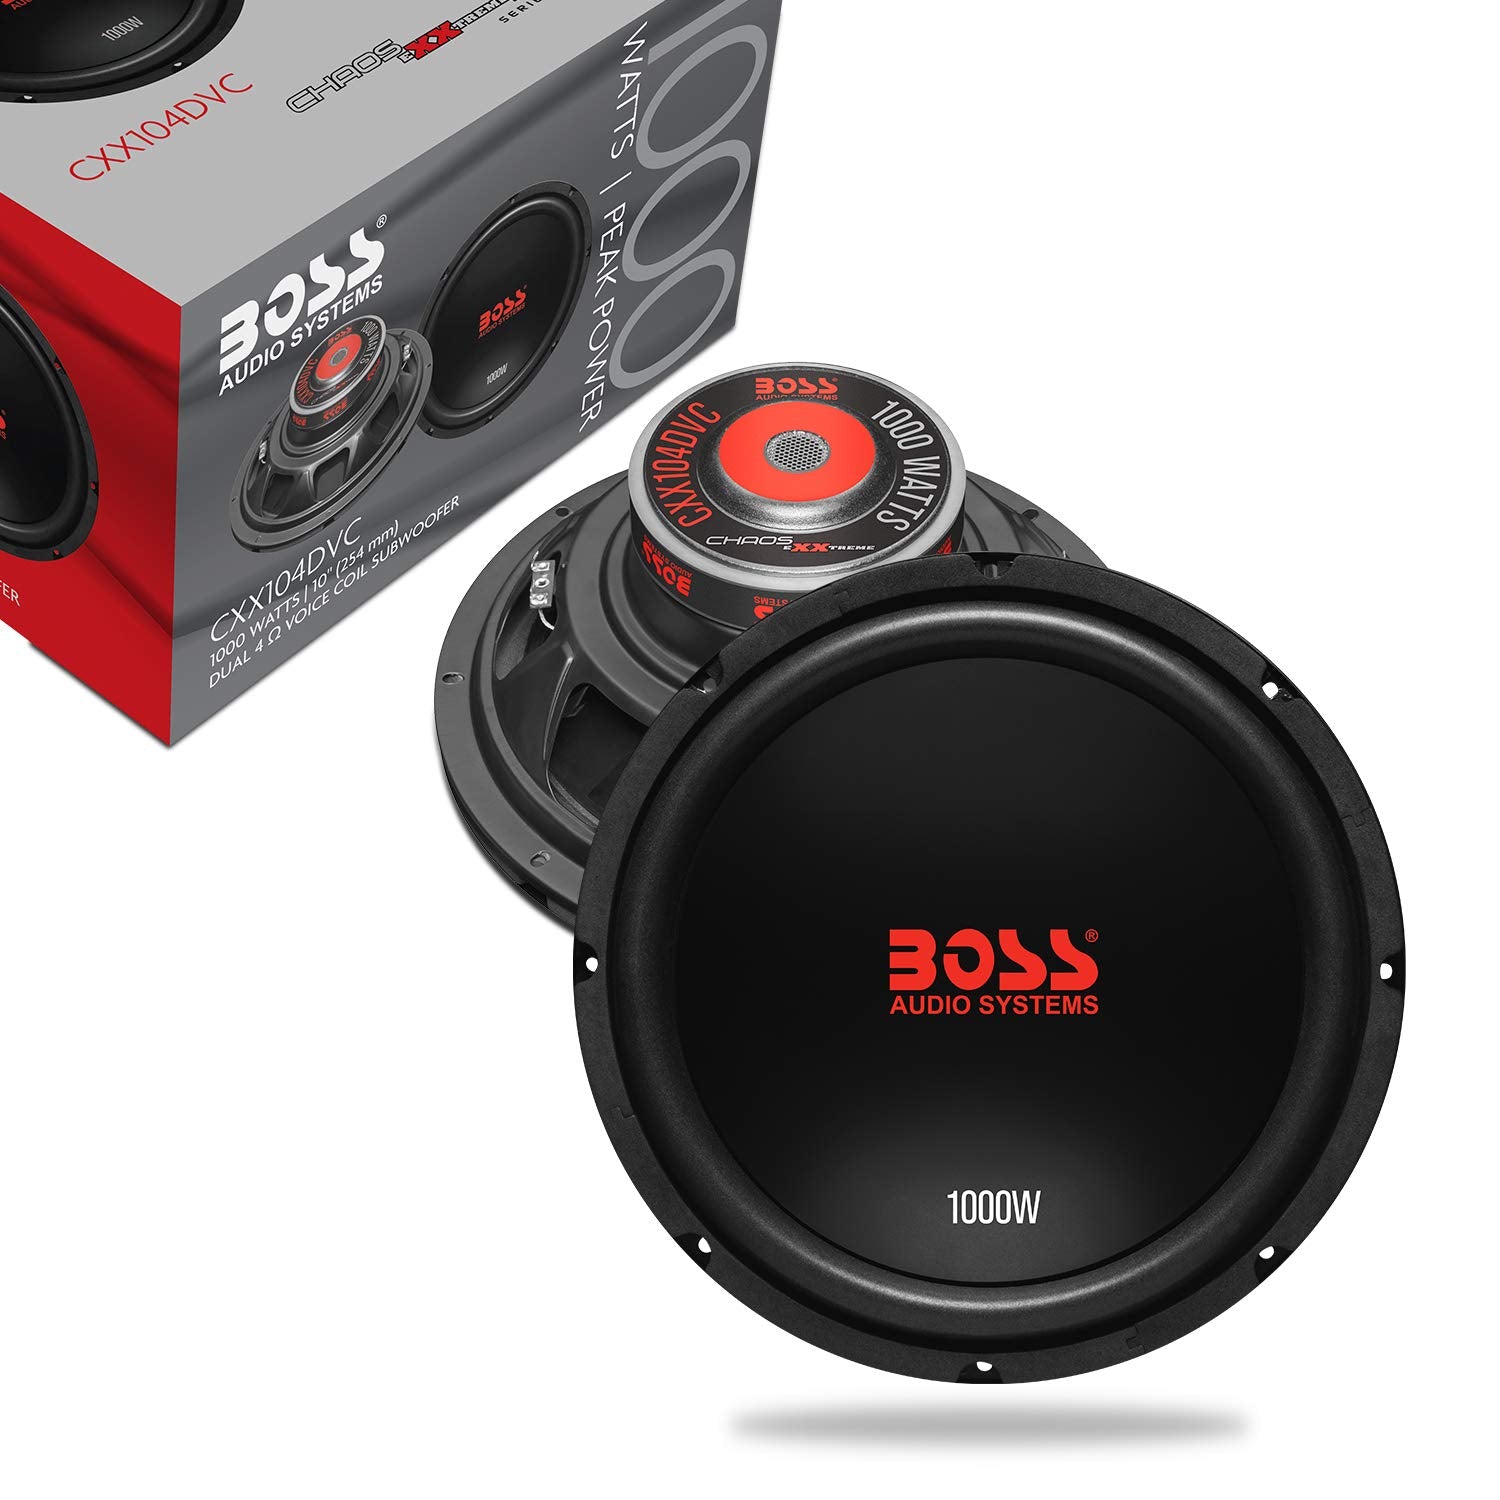 BOSS Audio Systems CXX104DVC Car Subwoofer - 1000 Watts Maximum Power, 10 Inch, Dual 4 Ohm Voice Coil, Sold Individually